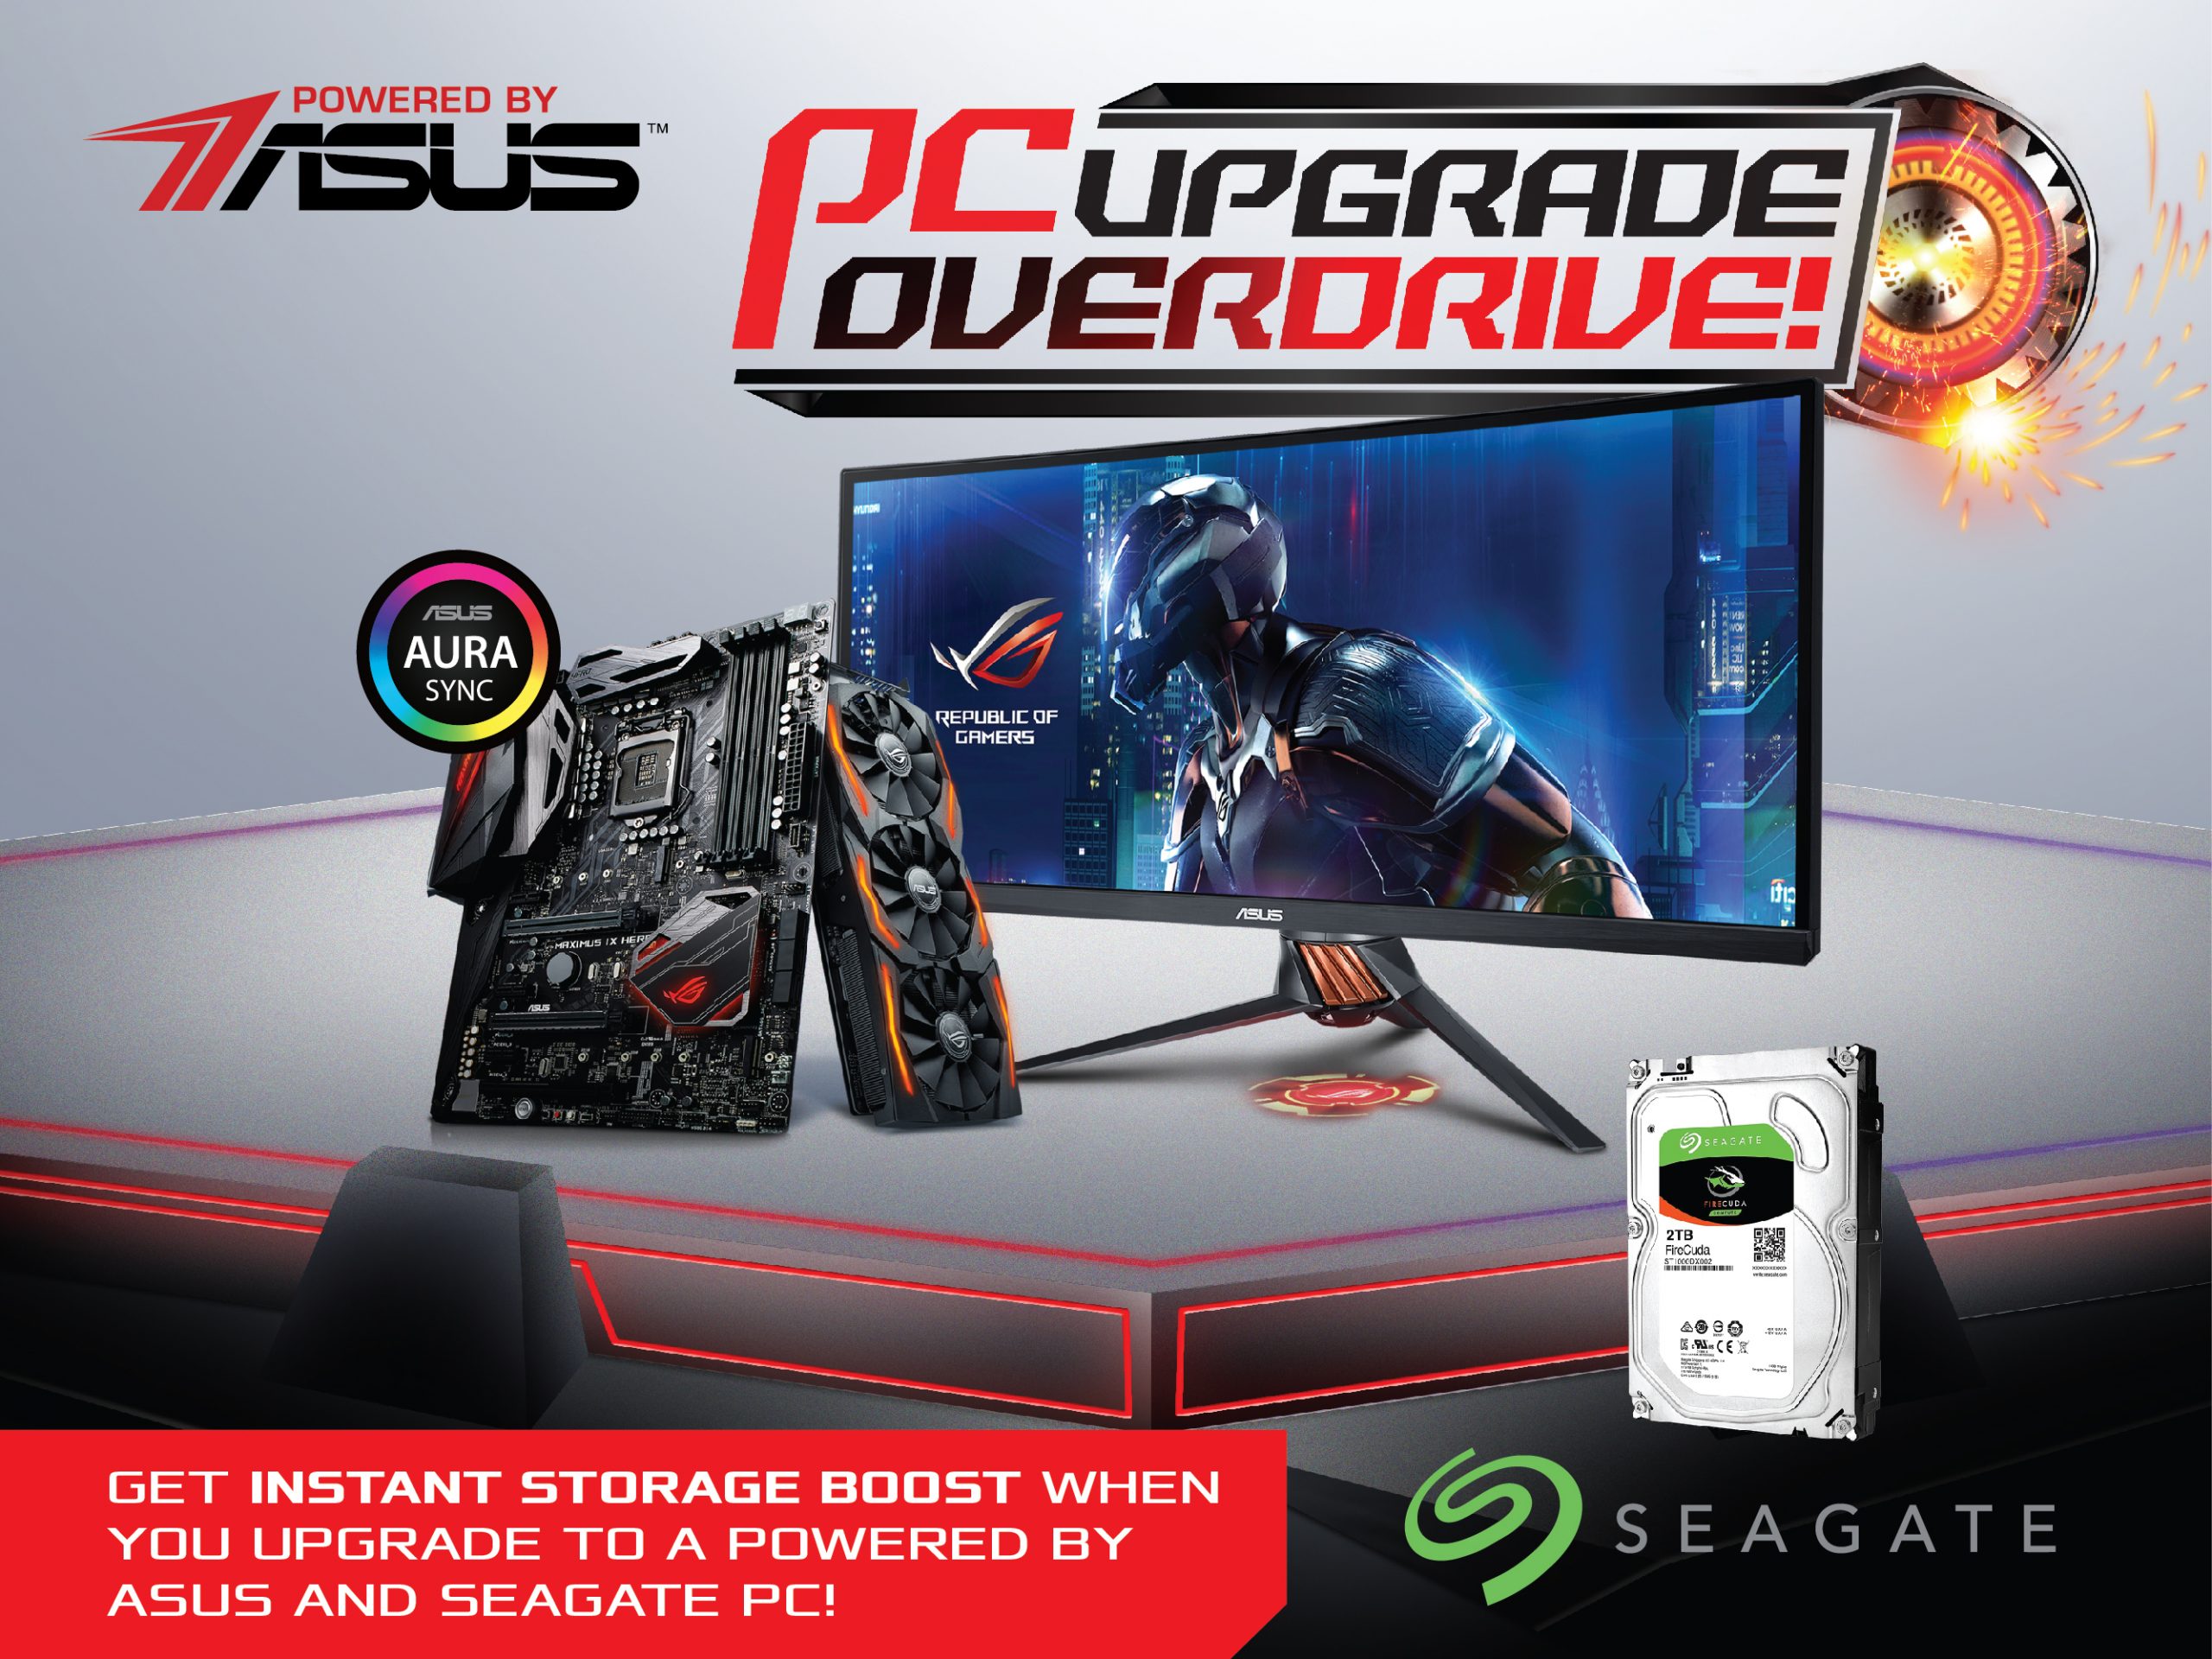 Enjoy a Free Storage Upgrade When You Buy ASUS Products and a Seagate FireCuda